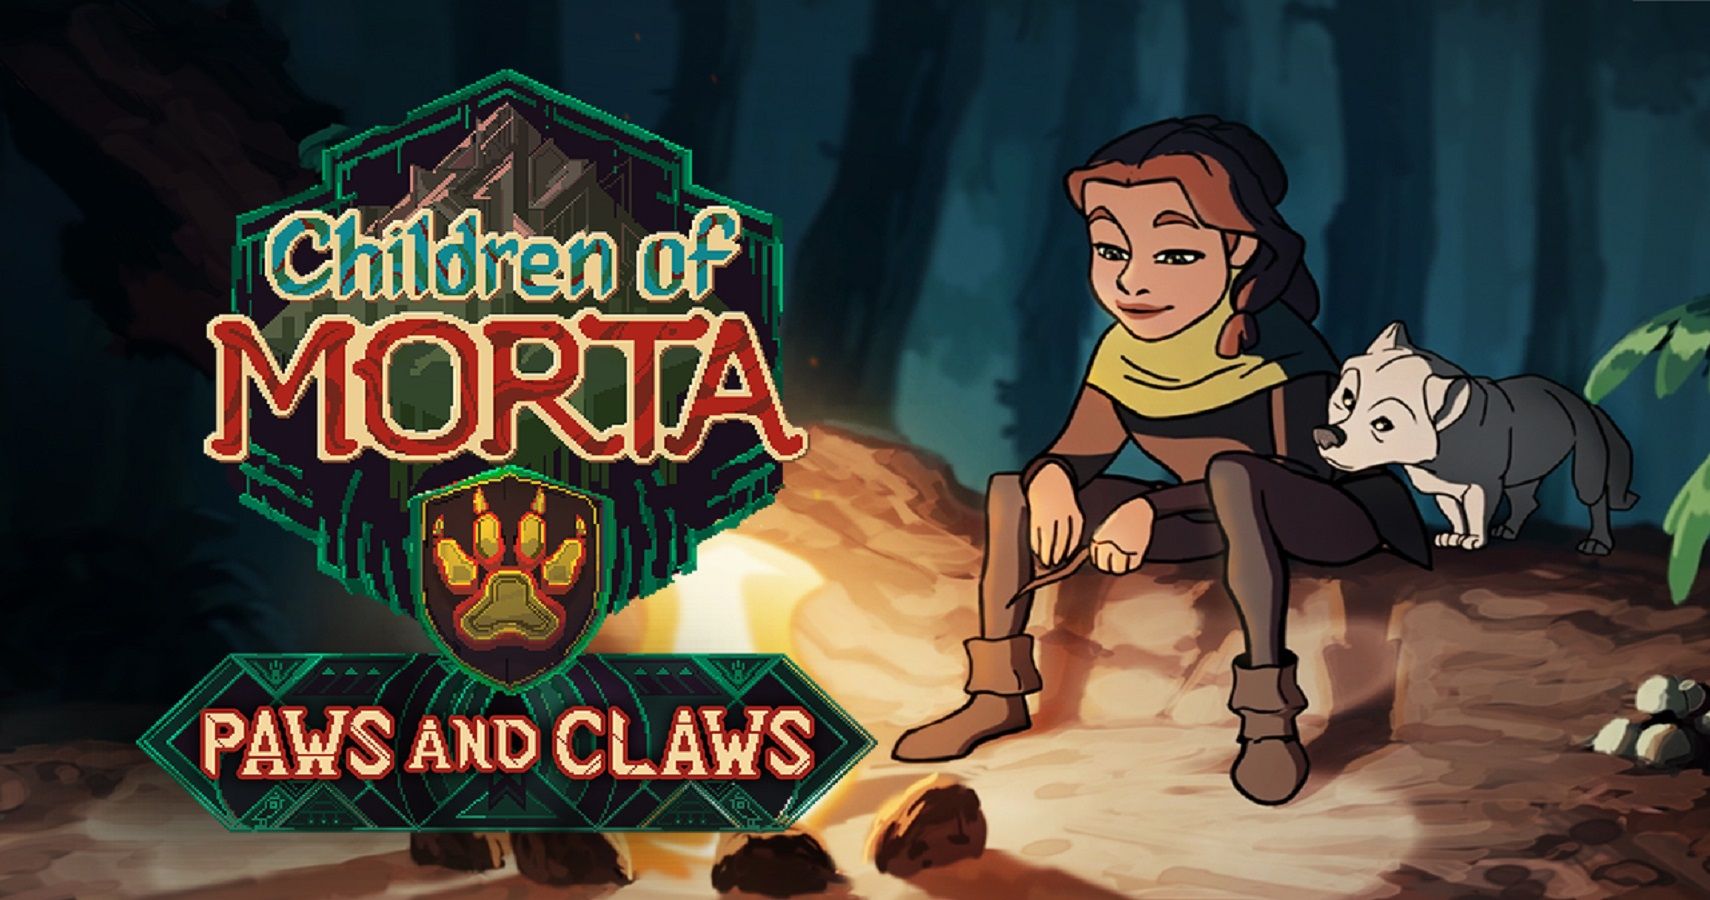 Children Of Morta Paws And Claws DLC Launches Humane Society International To Receive Proceeds